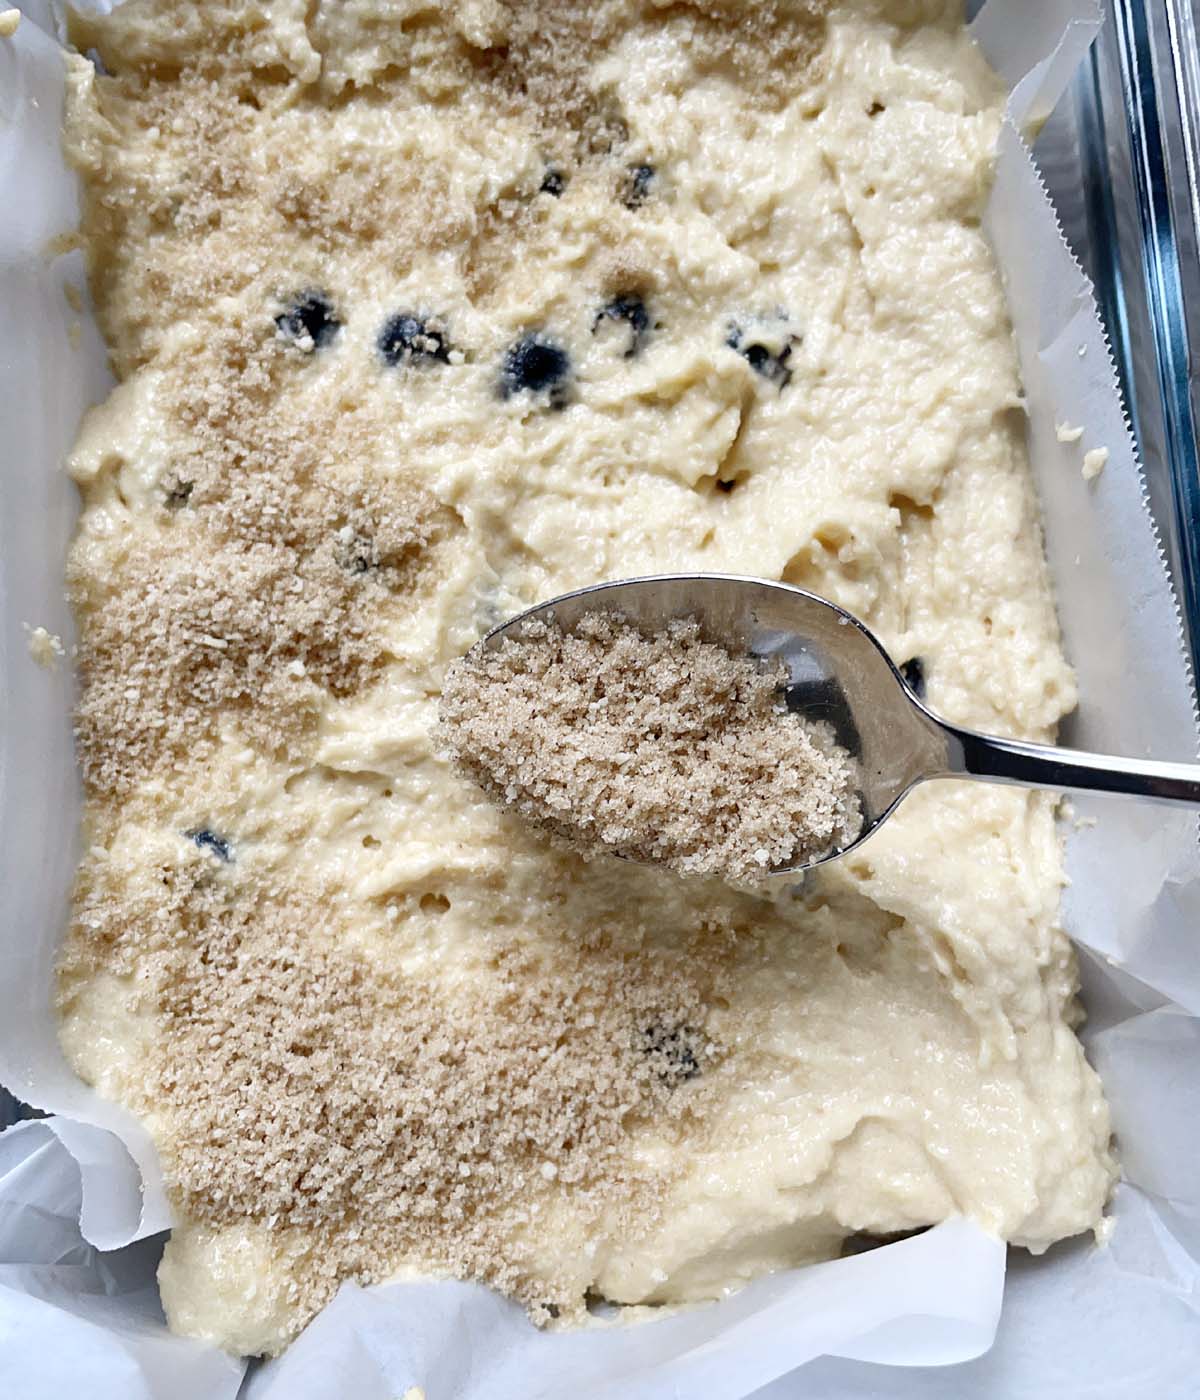 A spoon sprinkling a brown crumbly flour over cake batter in a rectangular dish.